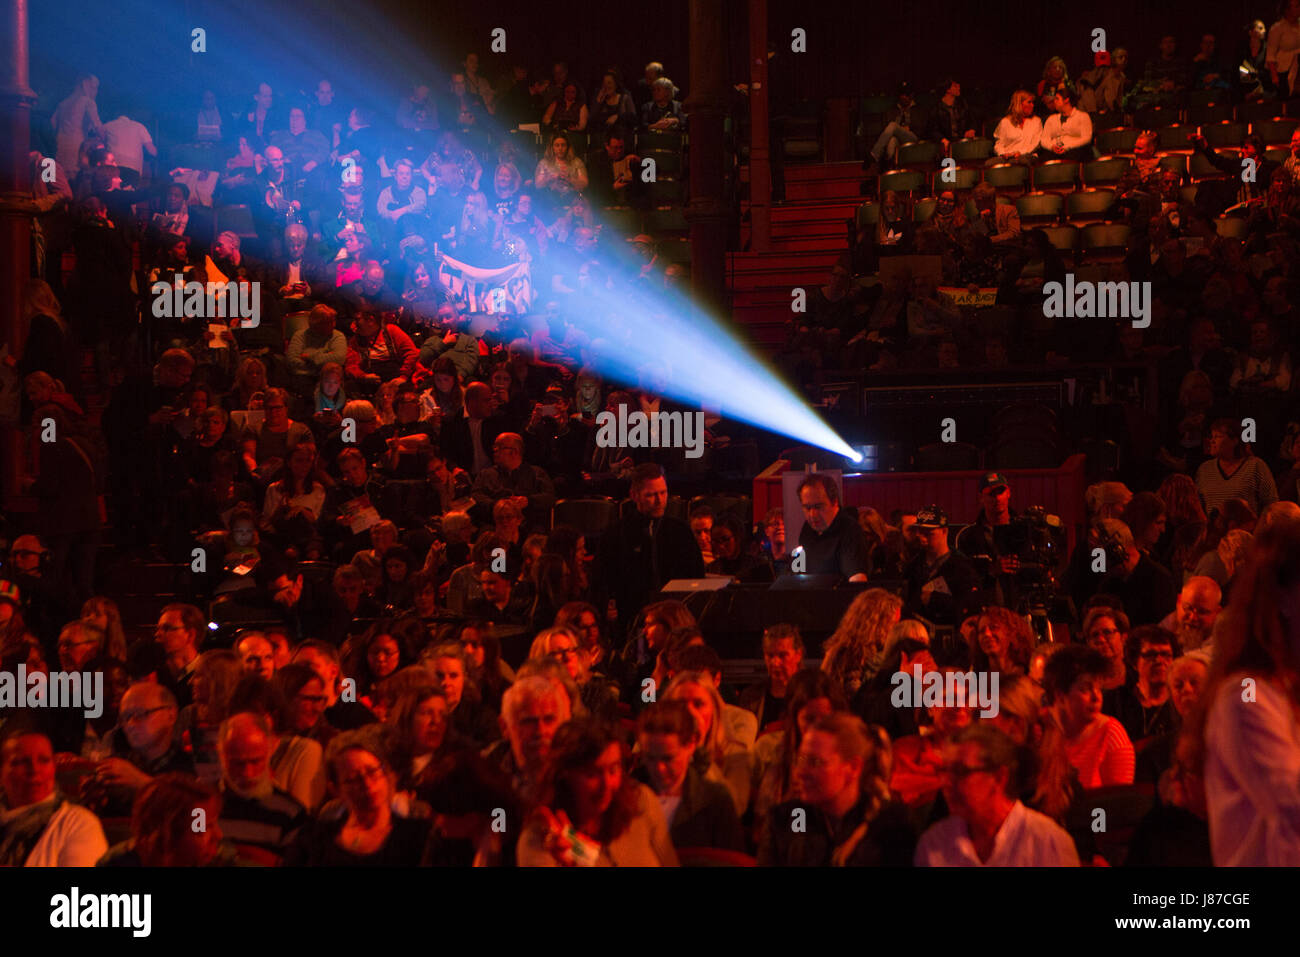 The audience before the performance at Circus, Stockholm, Sweden. Stock Photo